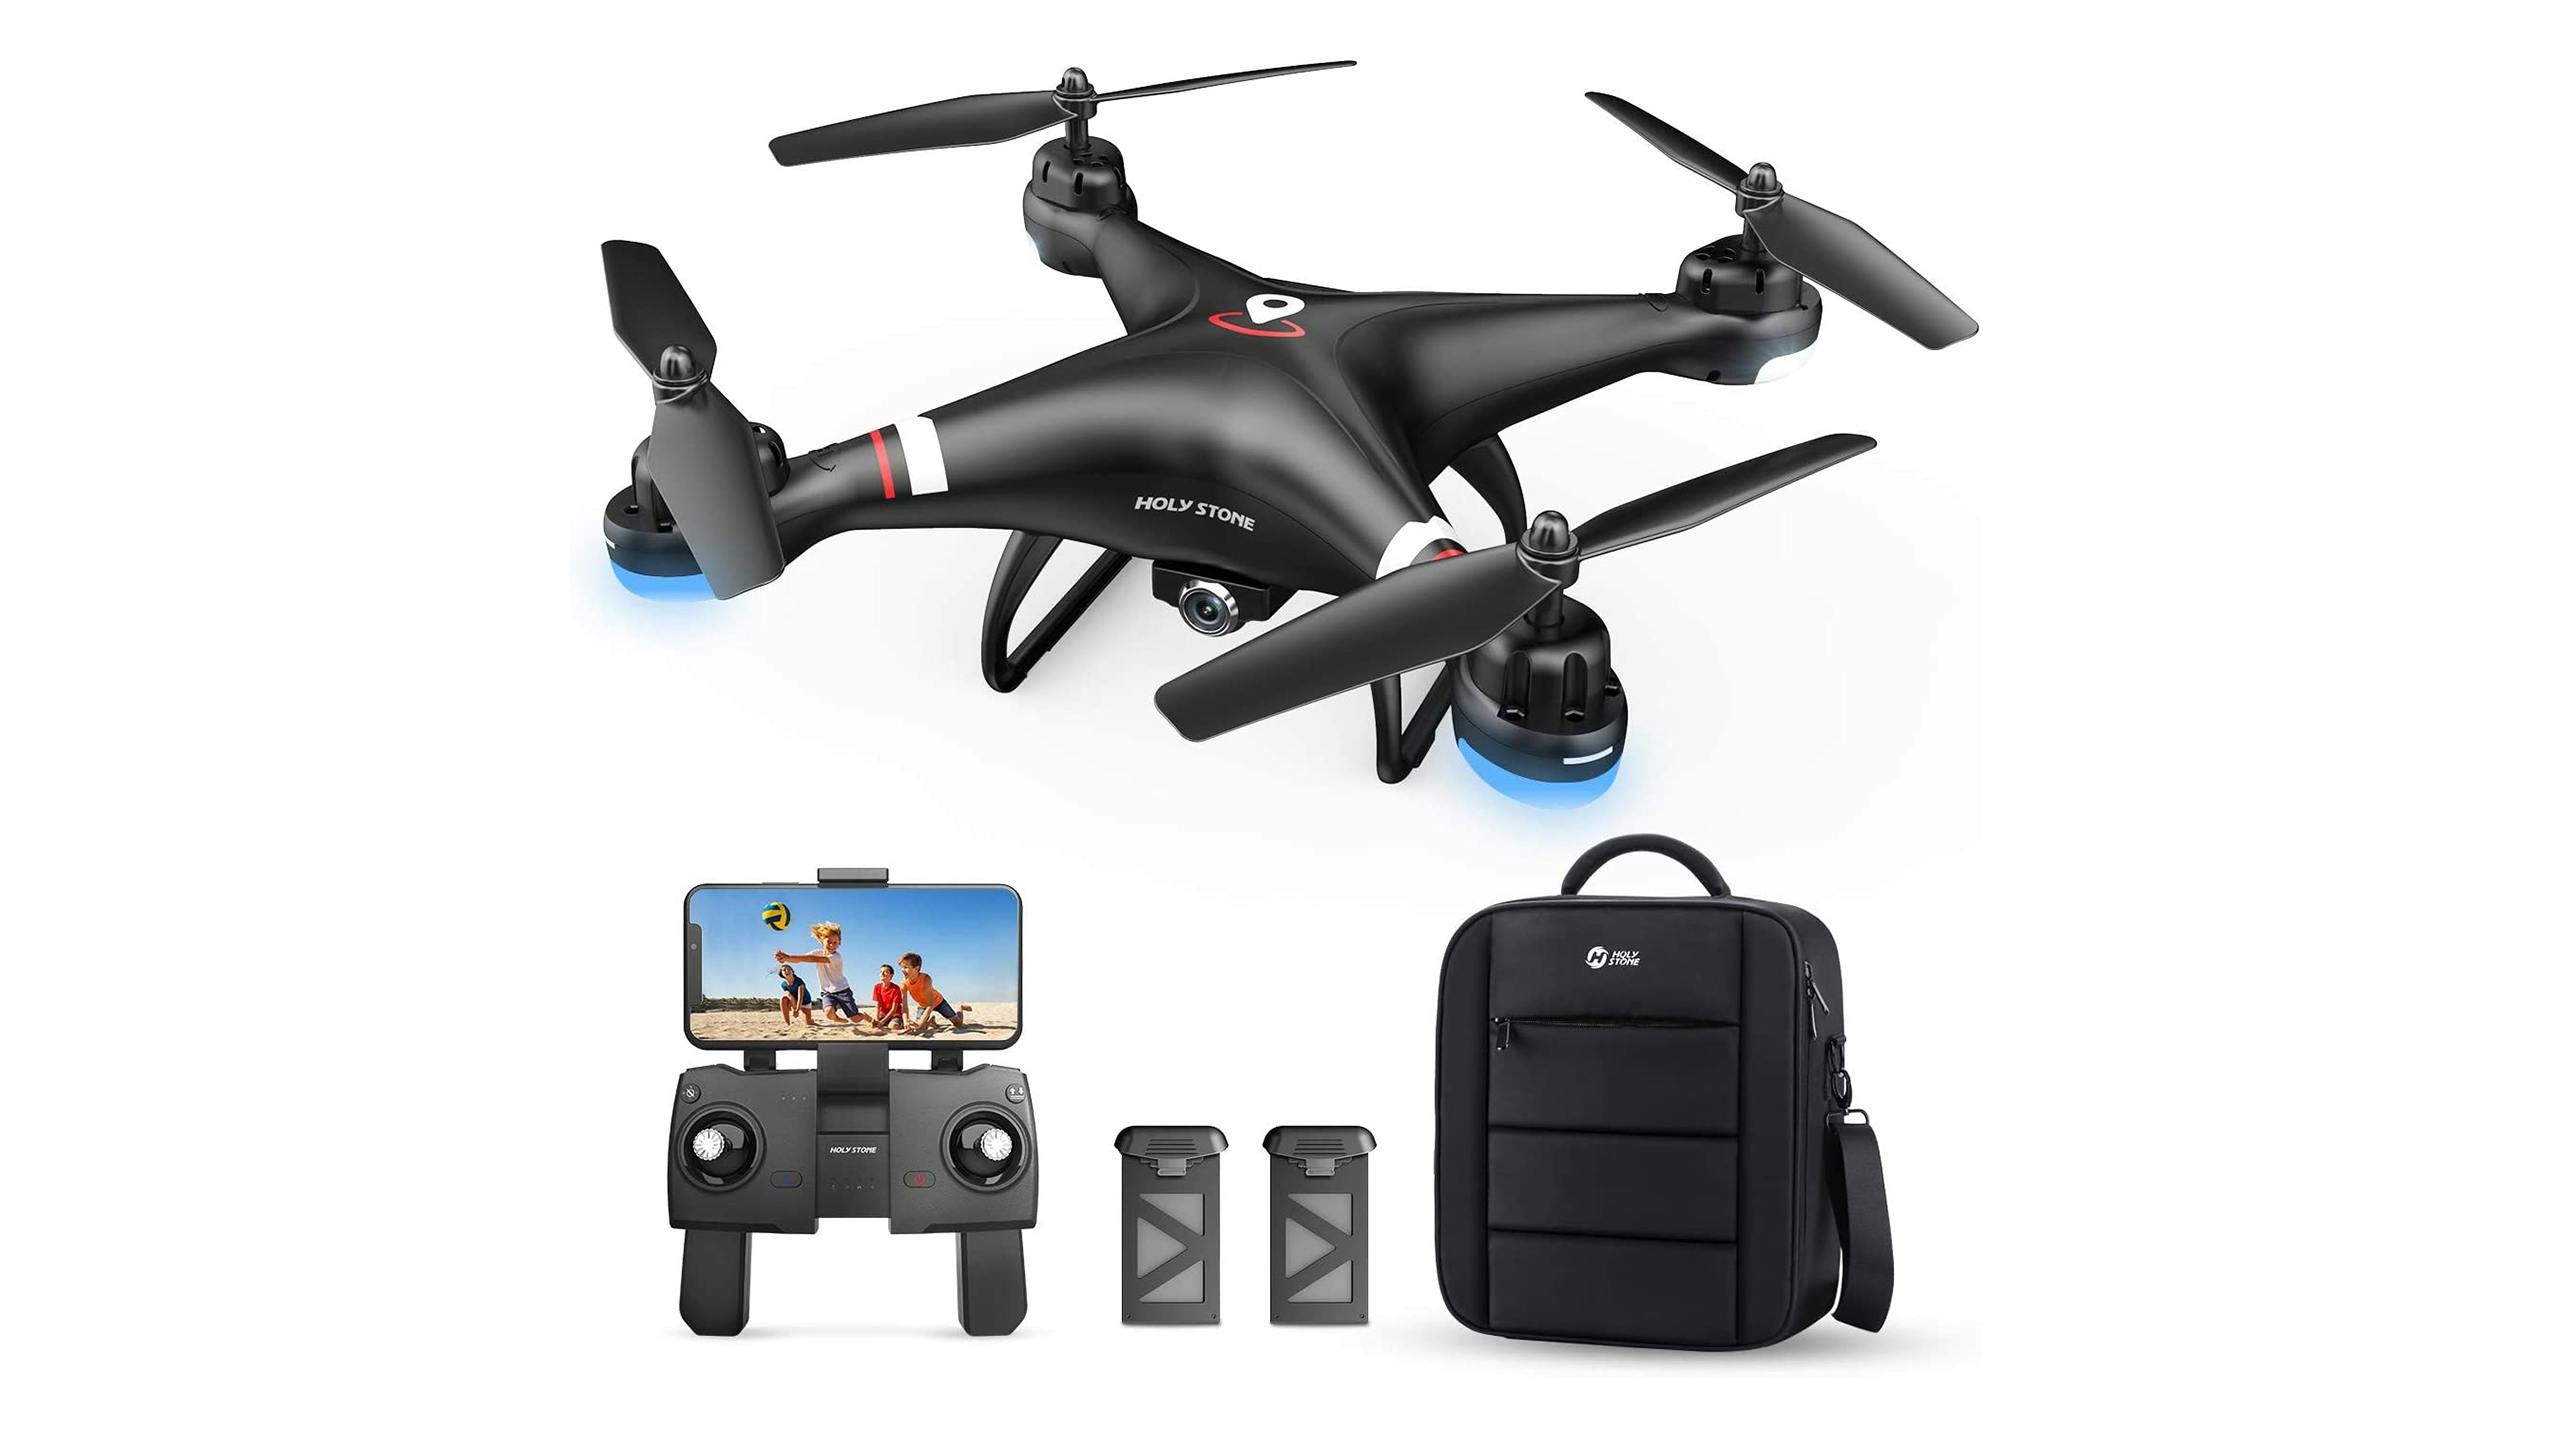 A Holy Stone GPS Drone along with its accessories, one of our favorite Christmas toy deals